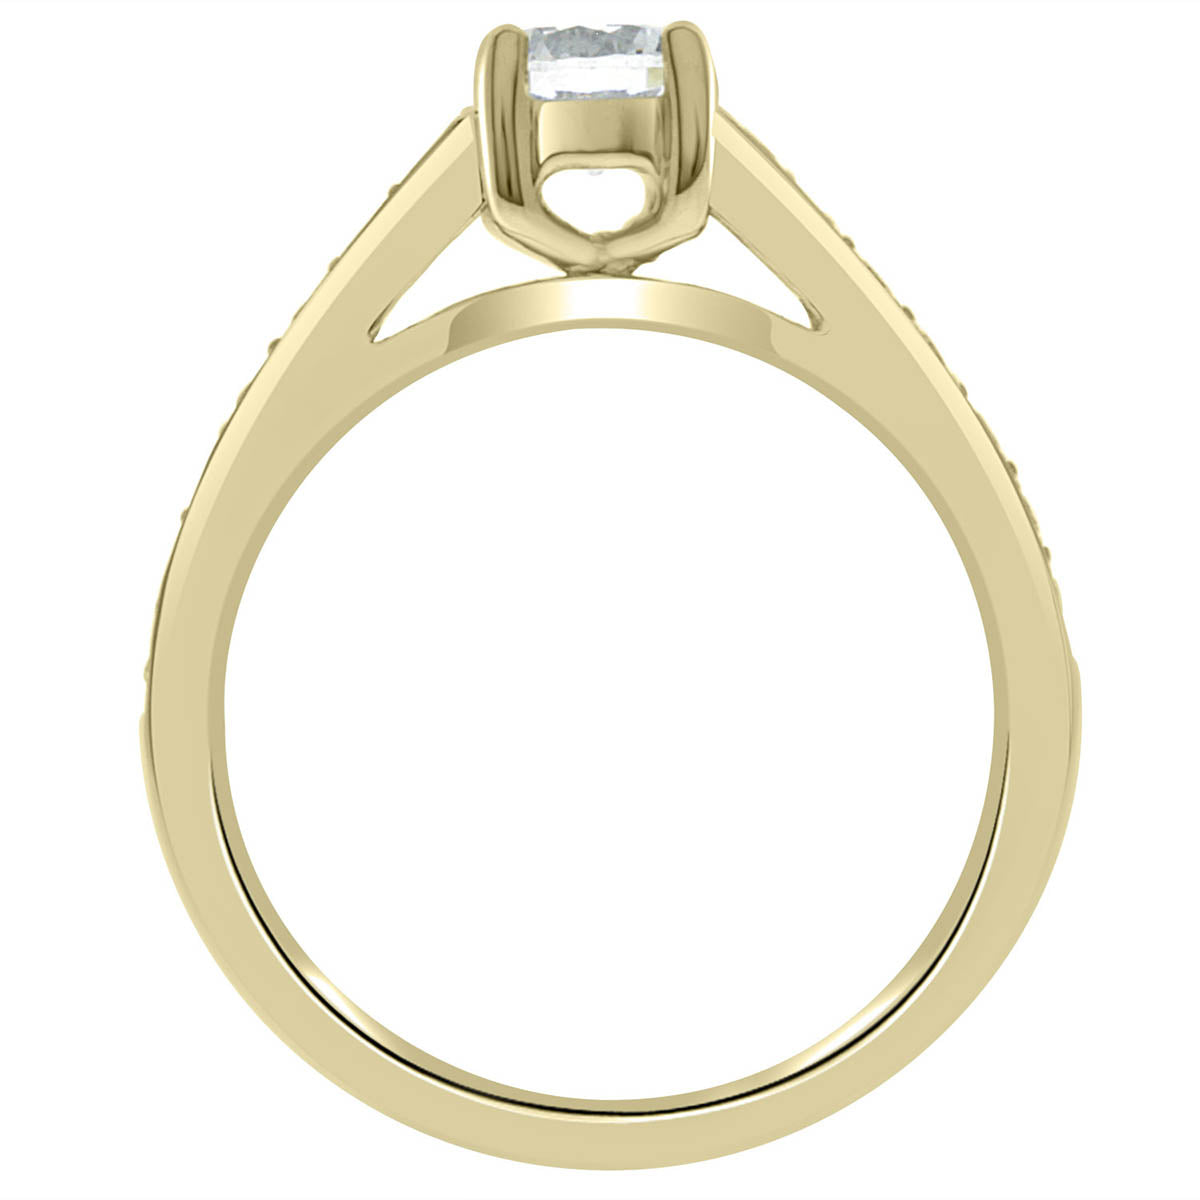 Pavé Diamond Ring manufactured in yellow gold standing in an upright position